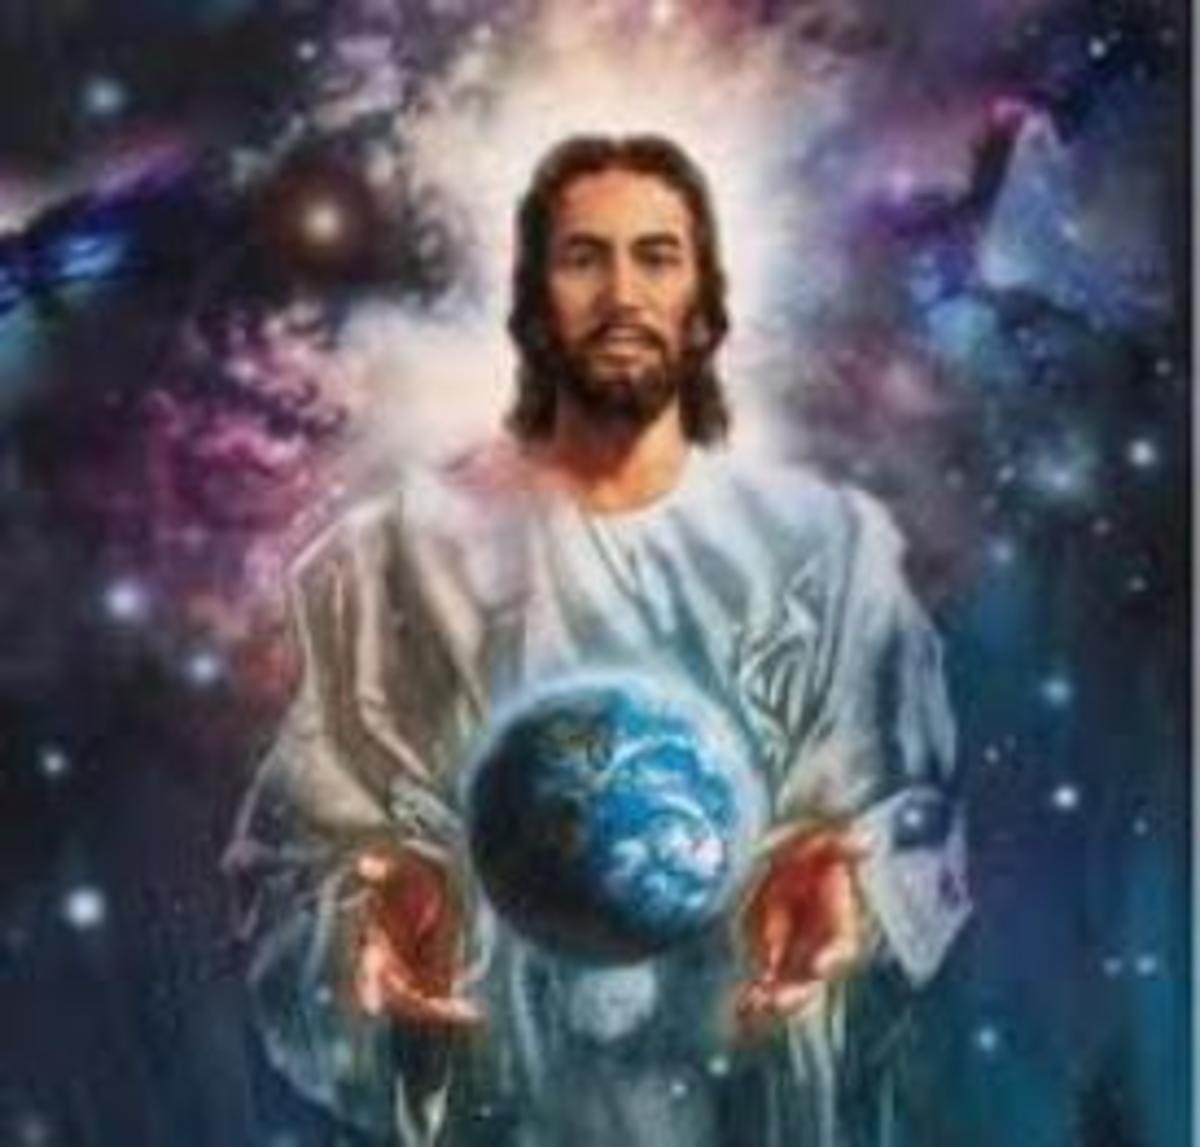 Our Lord Jesus Christ is also an angel of God and son of God, the whole world as we know it may depend from him, because he is linked to his Father God, and he is able to link with us, as he has been living on this planet earth already. 